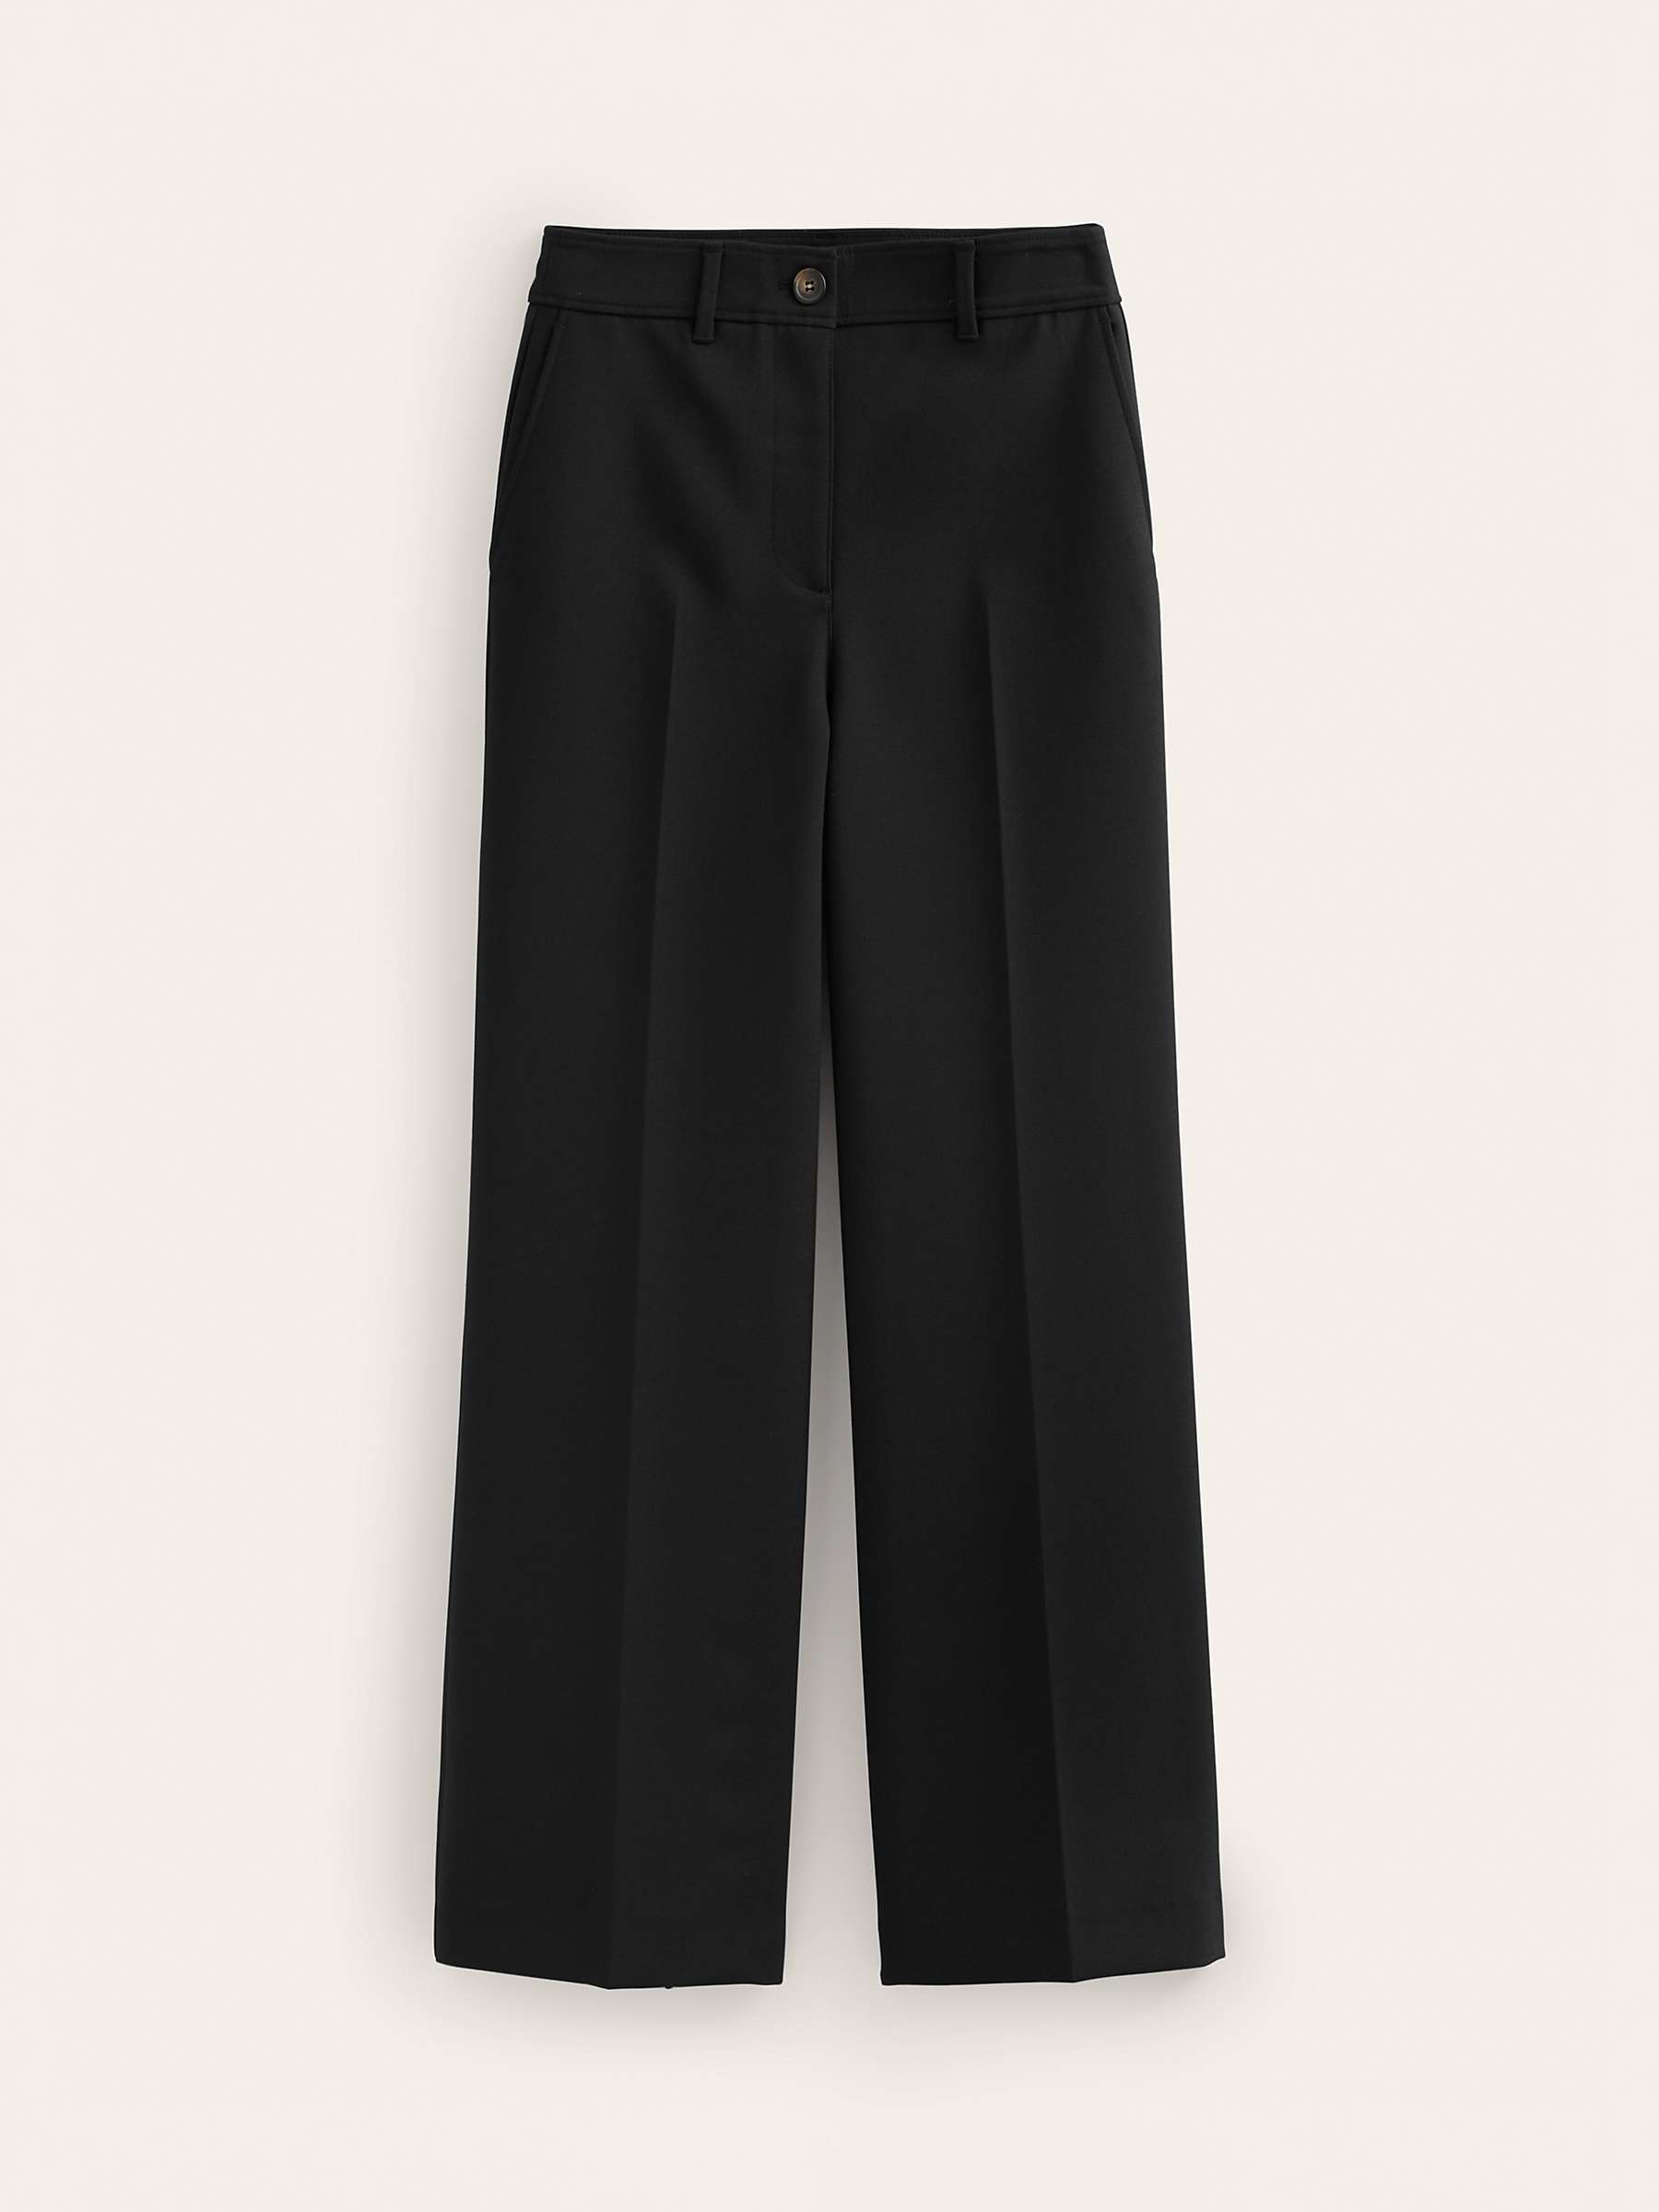 Boden Westbourne Wide Leg Trousers, Black at John Lewis & Partners